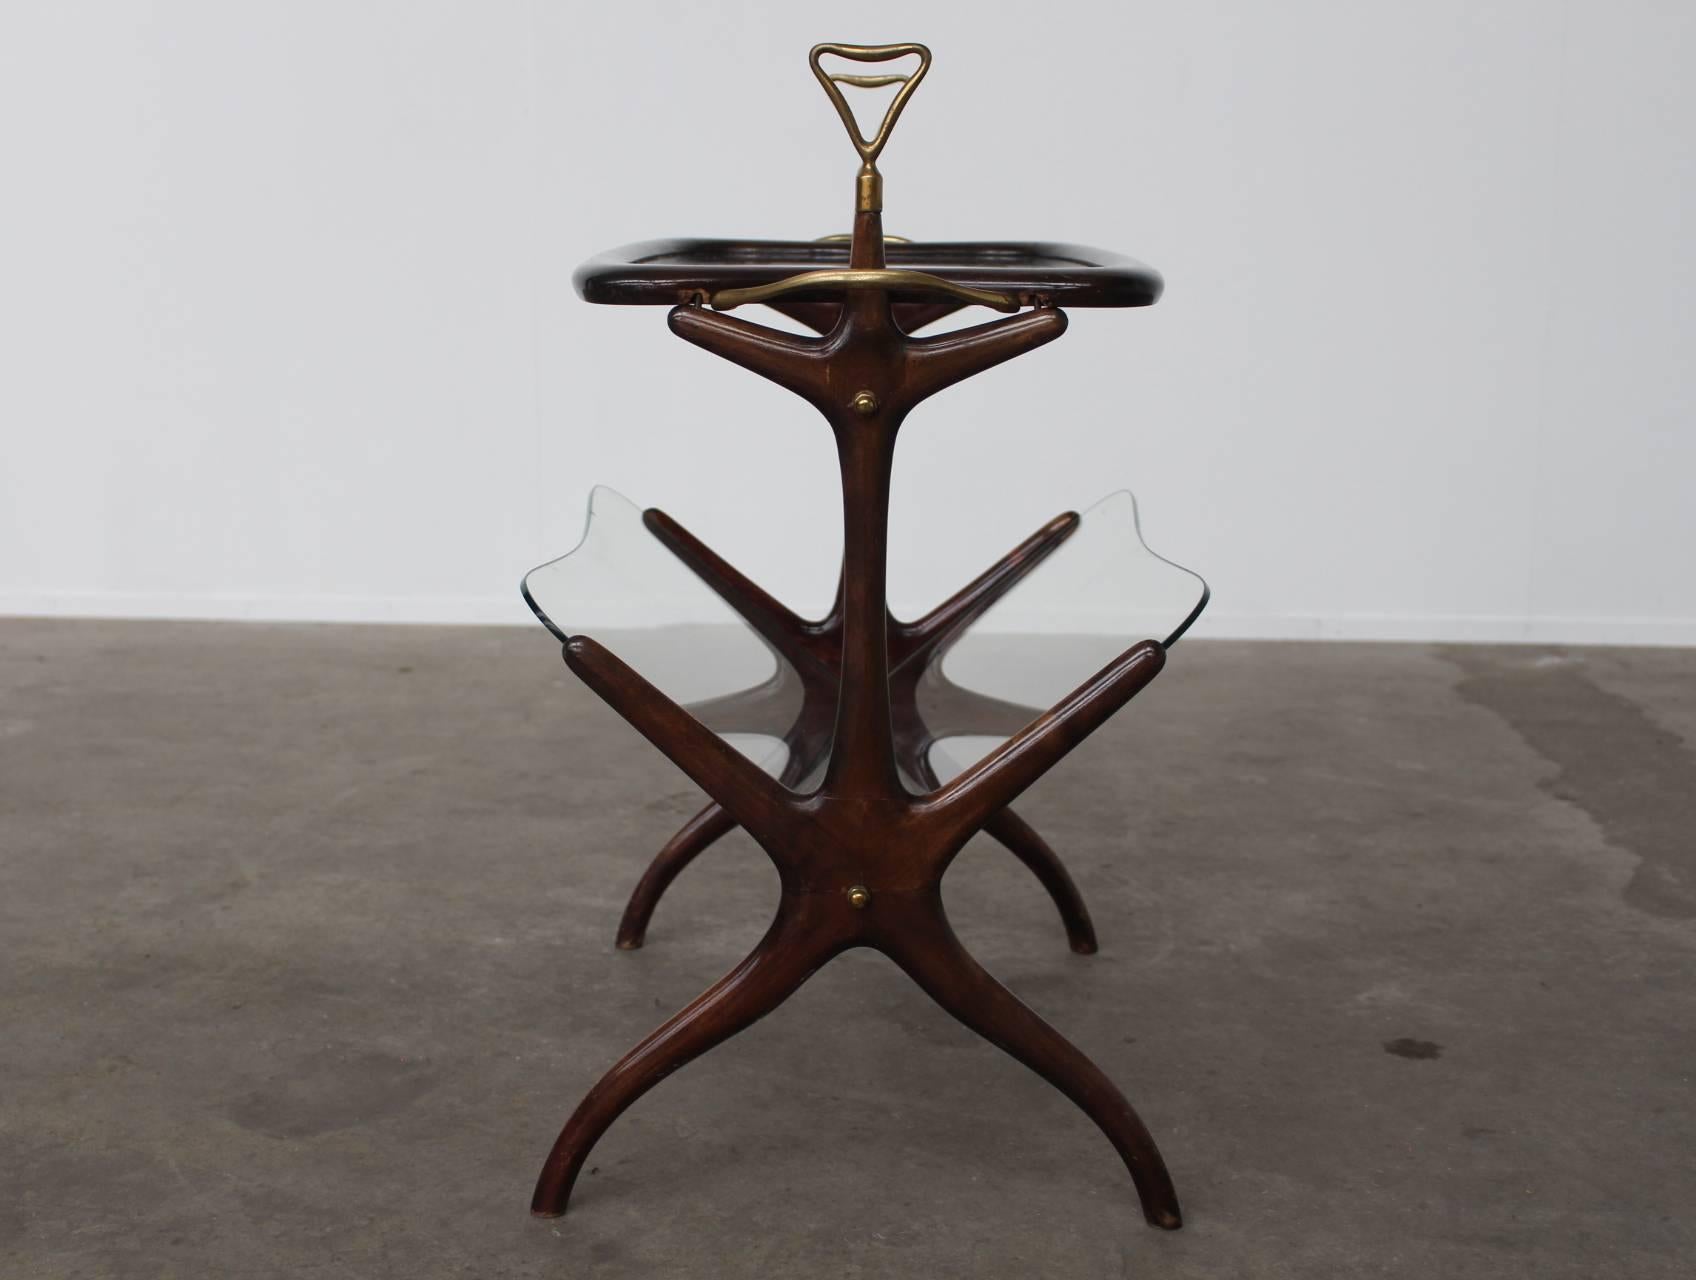 Beautiful organic shaped multi-functional side table.
This table can be used as a magazine rack on the lower level, but also has the function of a serving tray / table.
The top with brass handles is removable and then becomes an elegant tray to